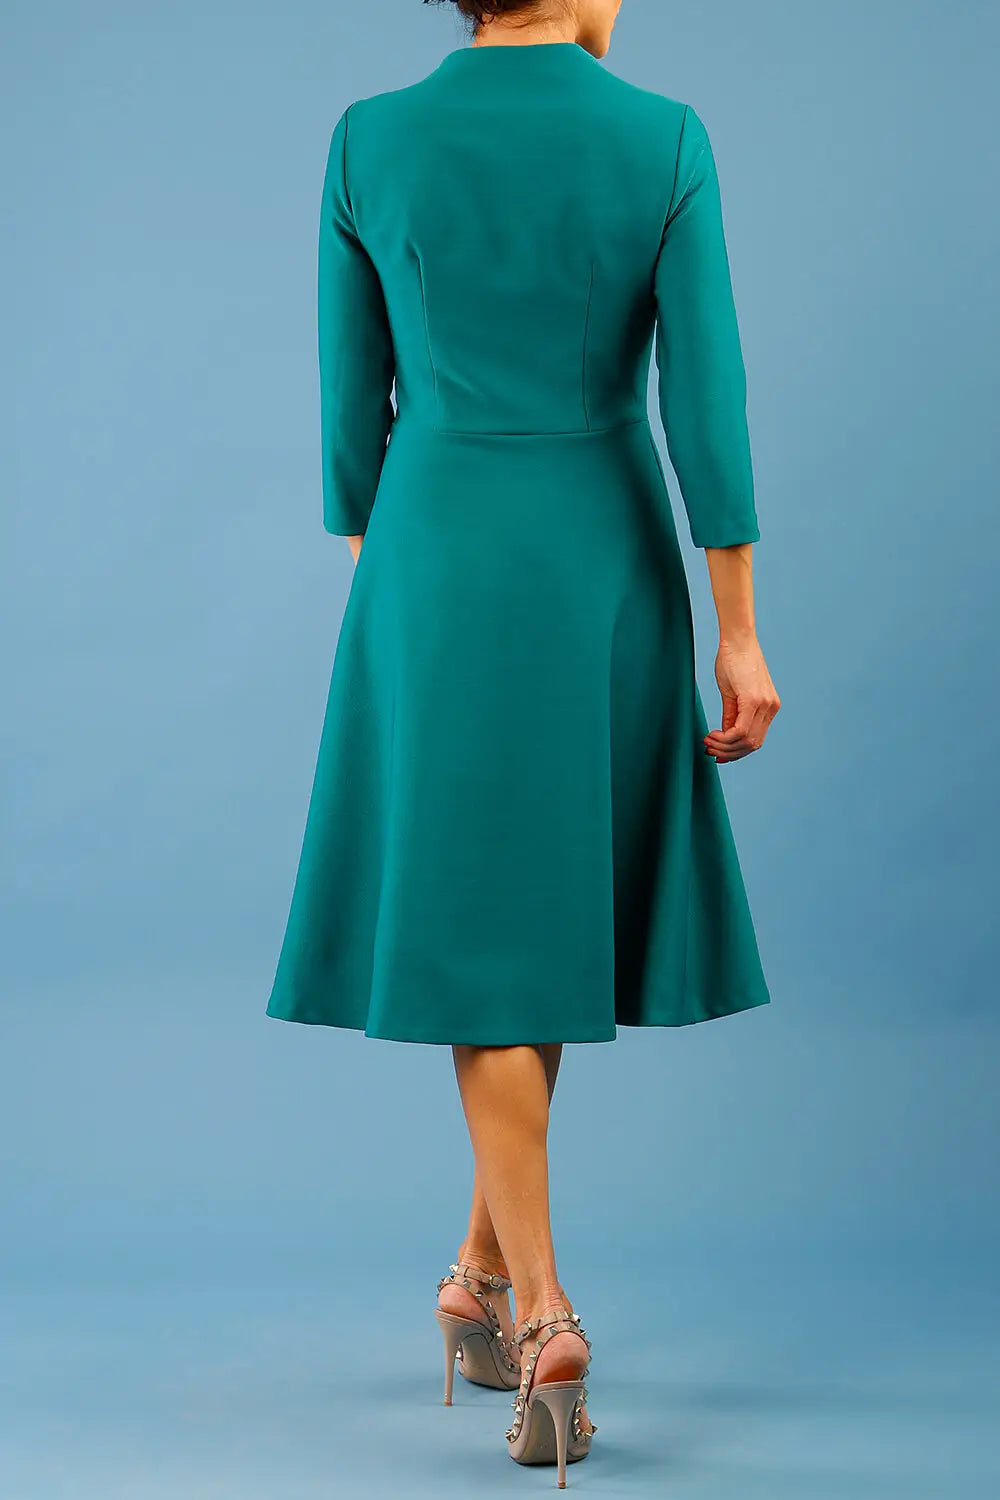 Women' Business Palmeston Dress - Pacific Green NORA GARDNER | OFFICIAL STORE for work and office